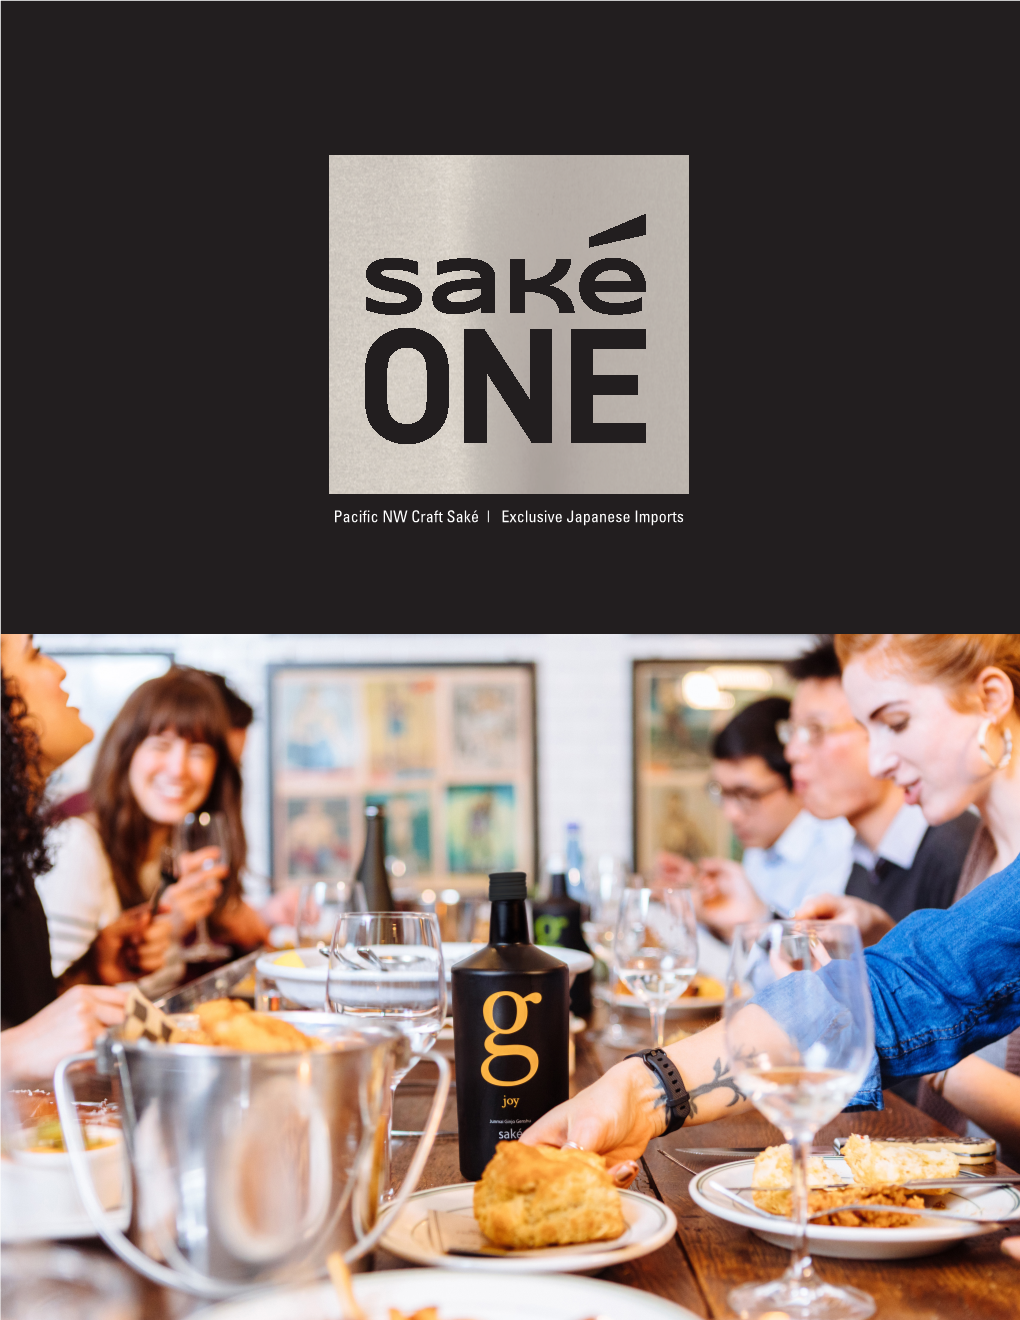 Pacific NW Craft Saké | Exclusive Japanese Imports